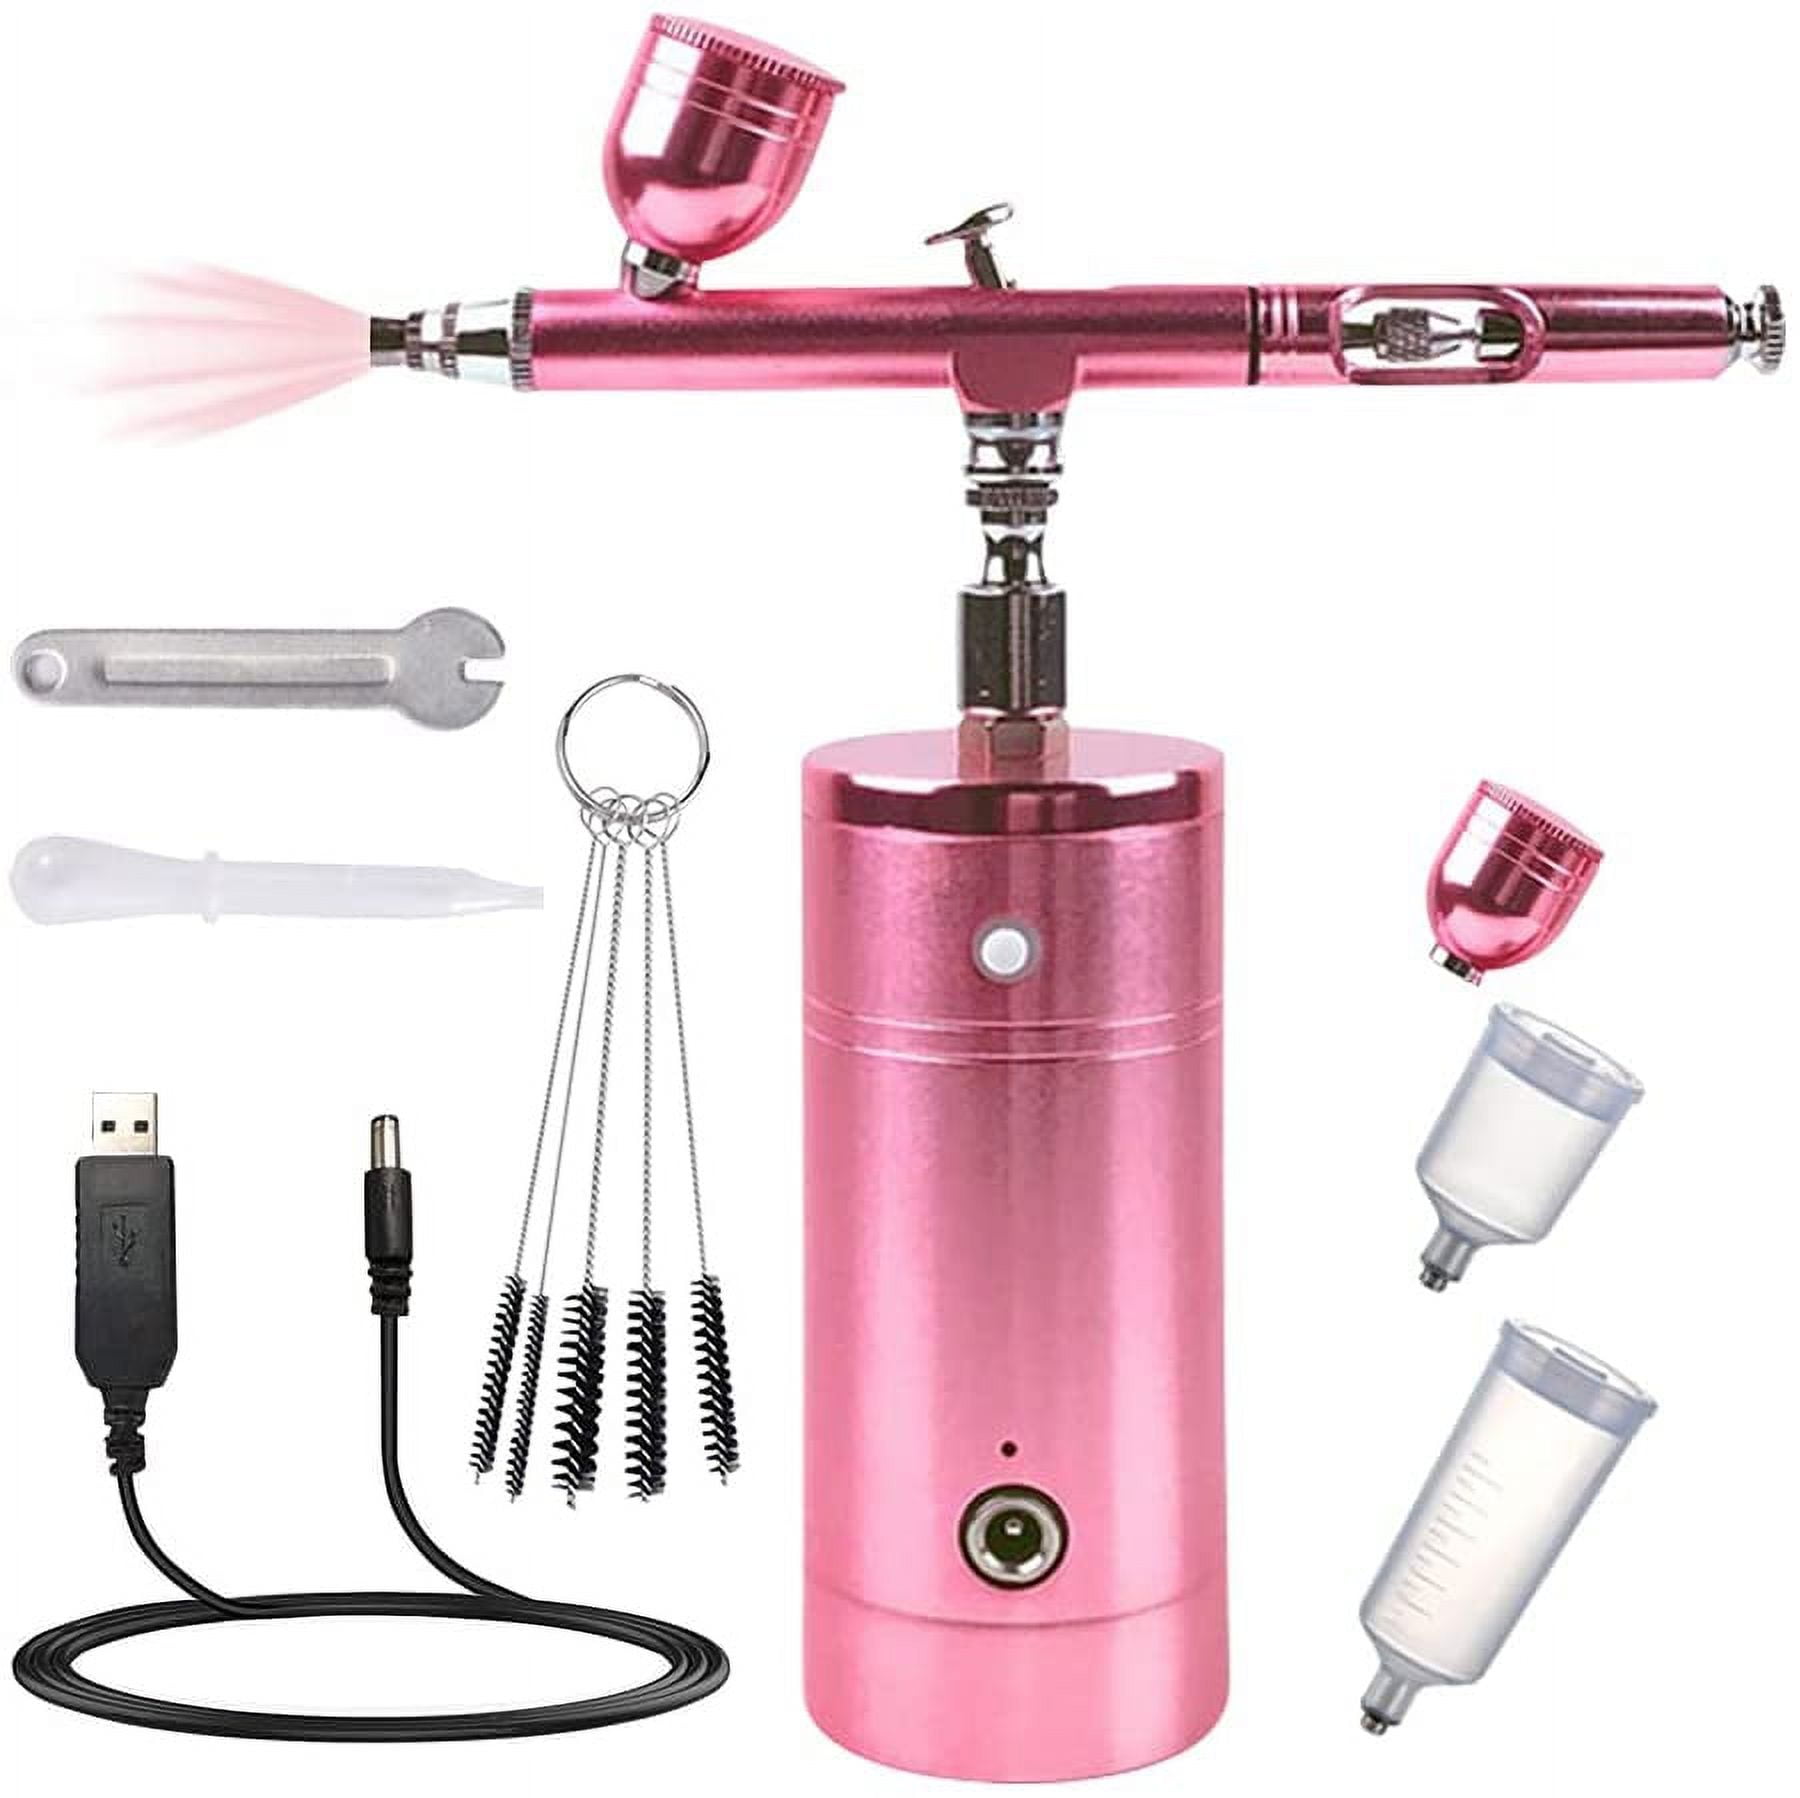 Complete Pneumatic Airbrush Kit With Hose And Compressor Spray Gun For Nail  Art, Tattoo, Body Paint, Cake Making, And Toy Model Making From Dicas,  $13.68